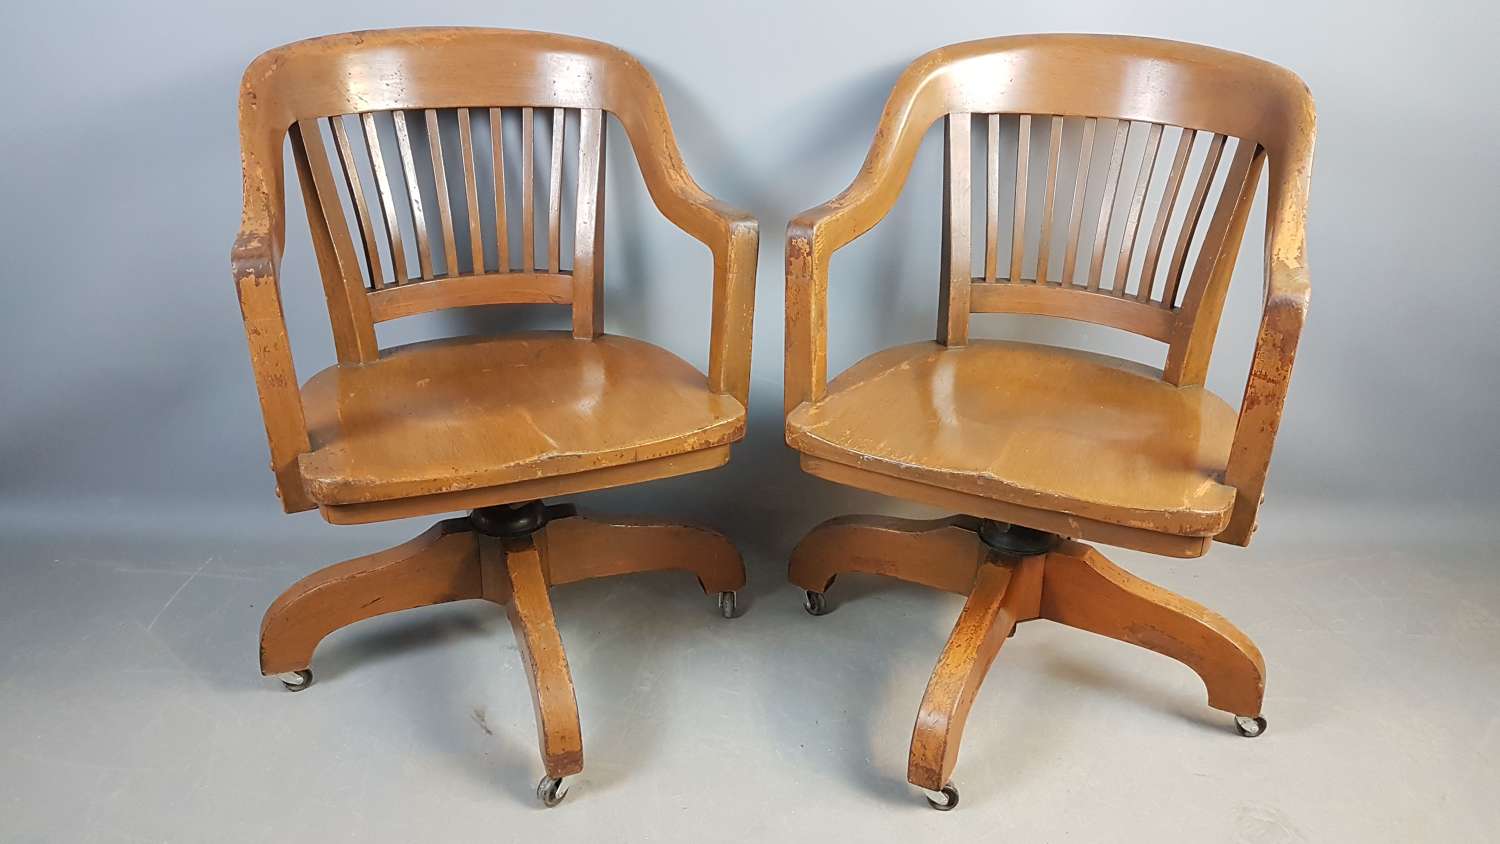 Pair of vintage walnut desk chairs in old paint